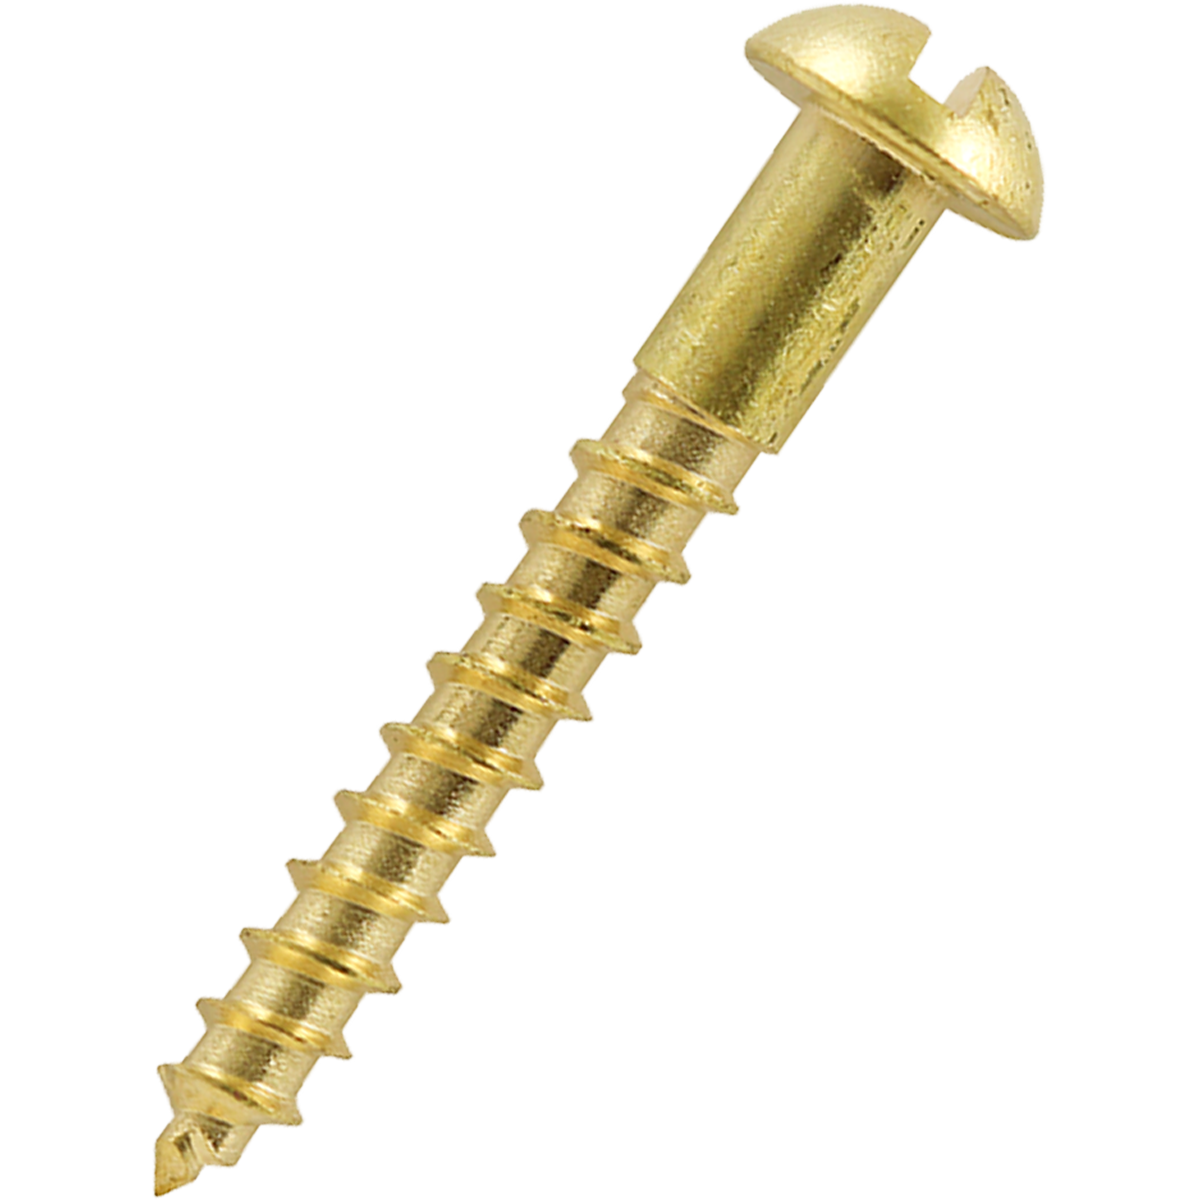 Brass, slotted, round-headed woodscrews at competitive prices.